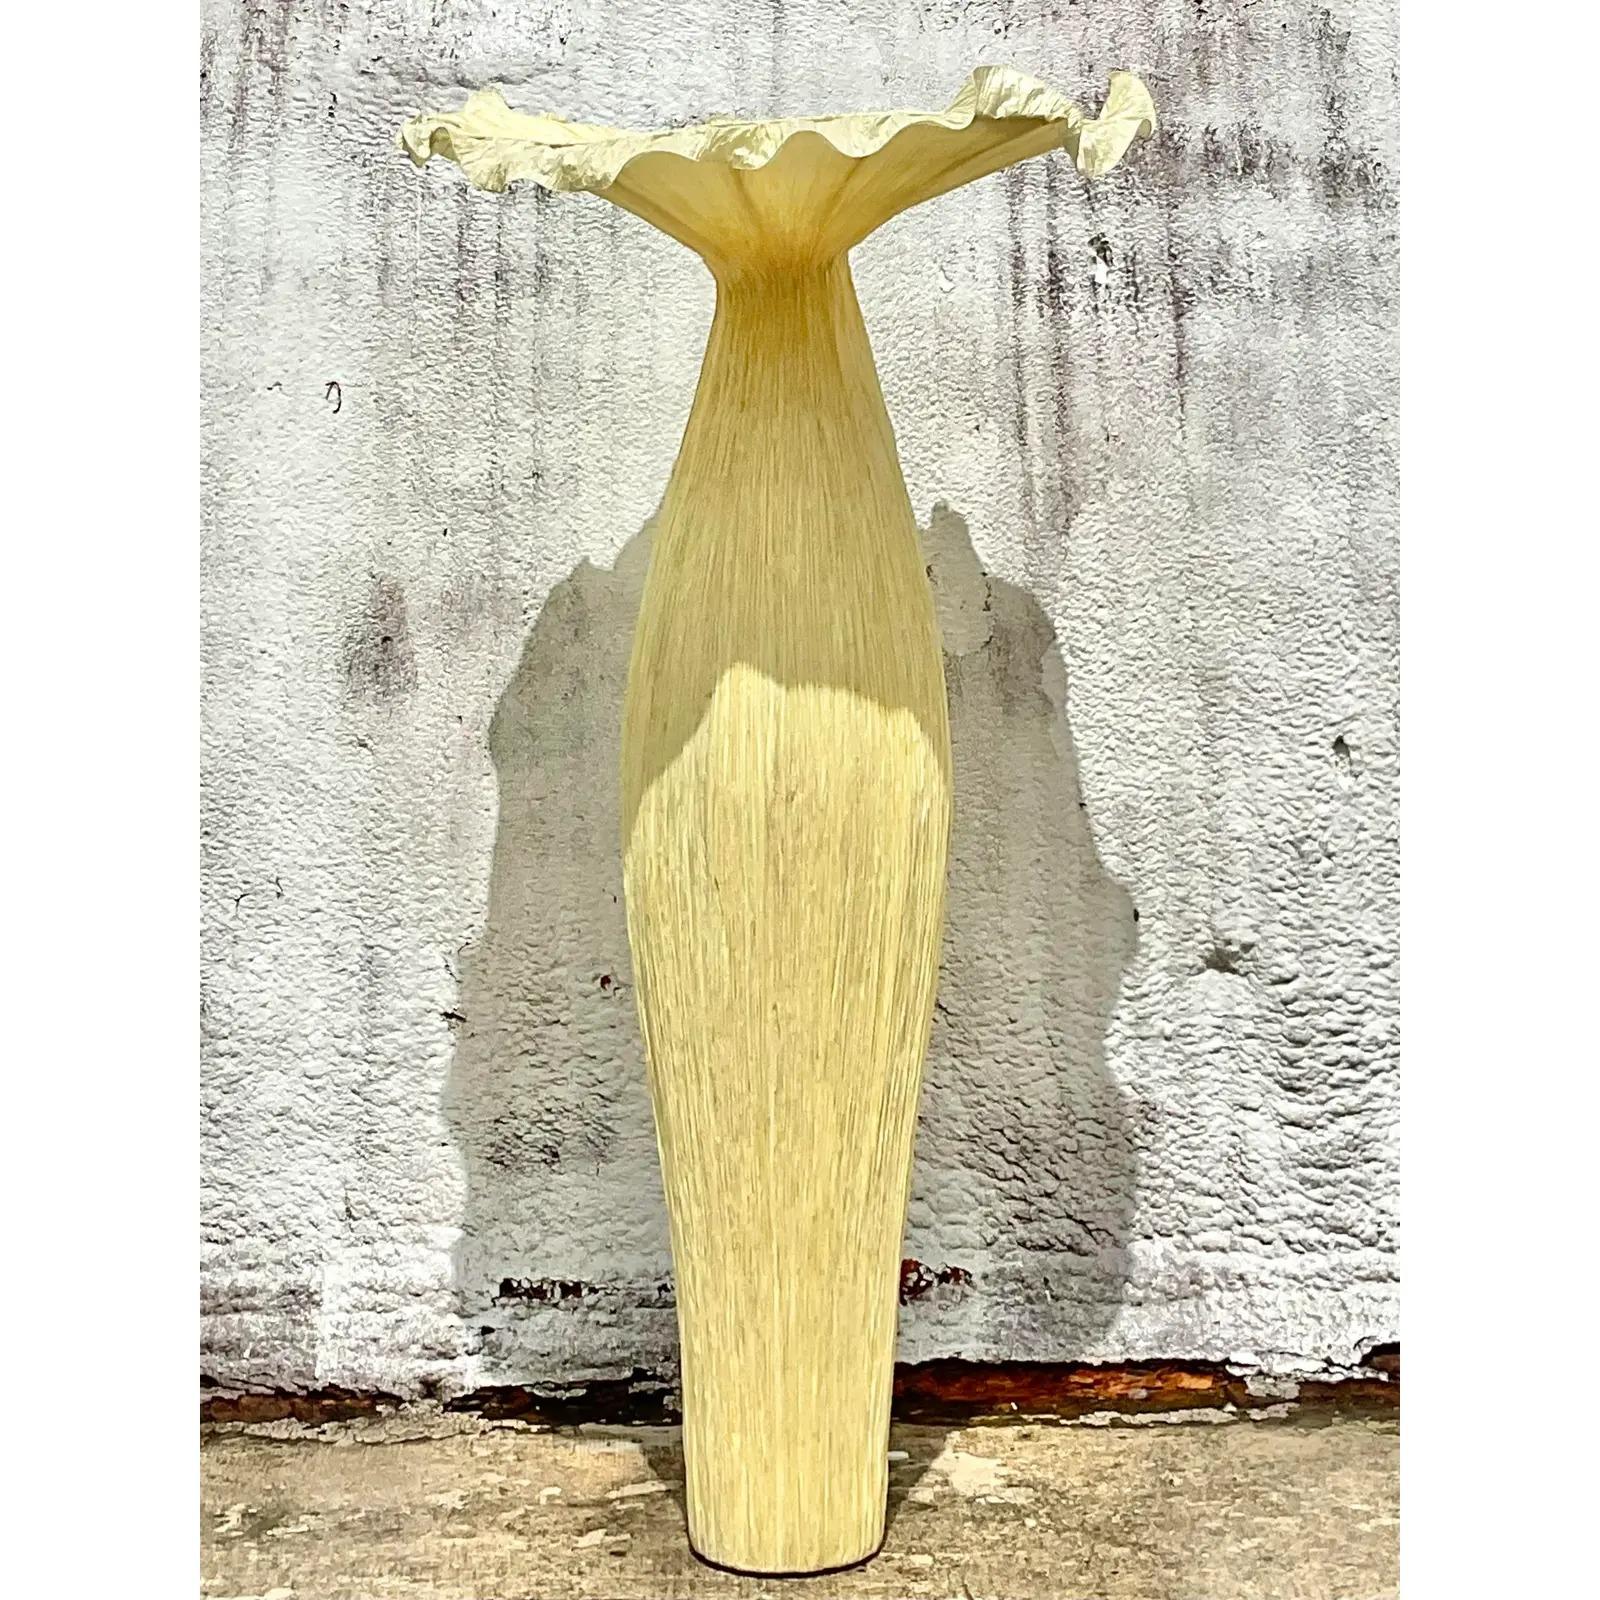 A fantastic vintage pleated silk over metal floor lamp. A beautiful organic shape inspired by shapes found in nature. Made by the creatives at Aqua Creations and called “Morning Glory”. Created by hand. Monumental in size and drama.

The lamp is in